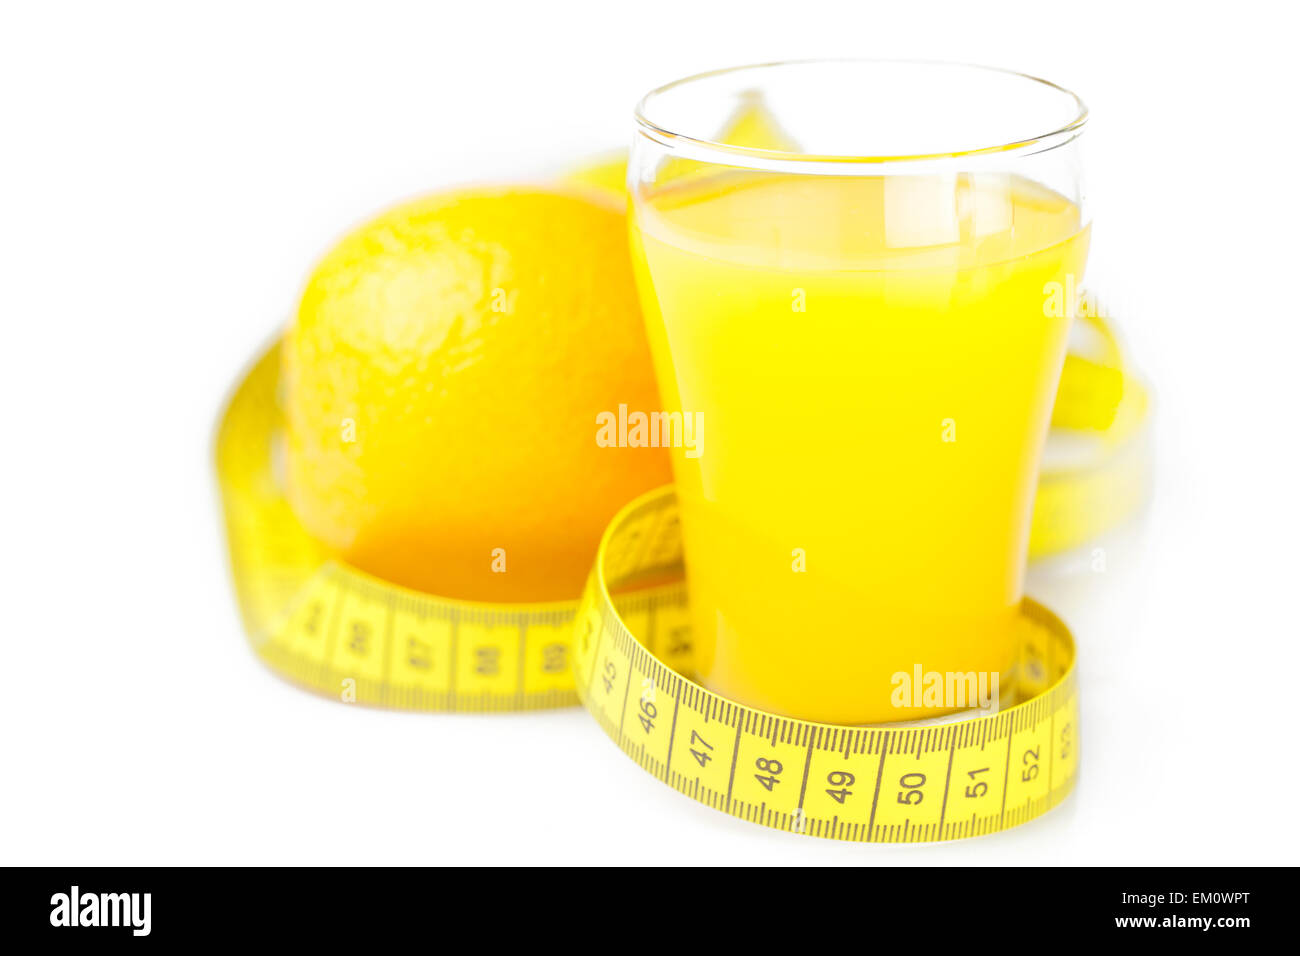 https://c8.alamy.com/comp/EM0WPT/measuring-tapeorange-and-a-glass-of-orange-juice-isolated-on-wh-EM0WPT.jpg